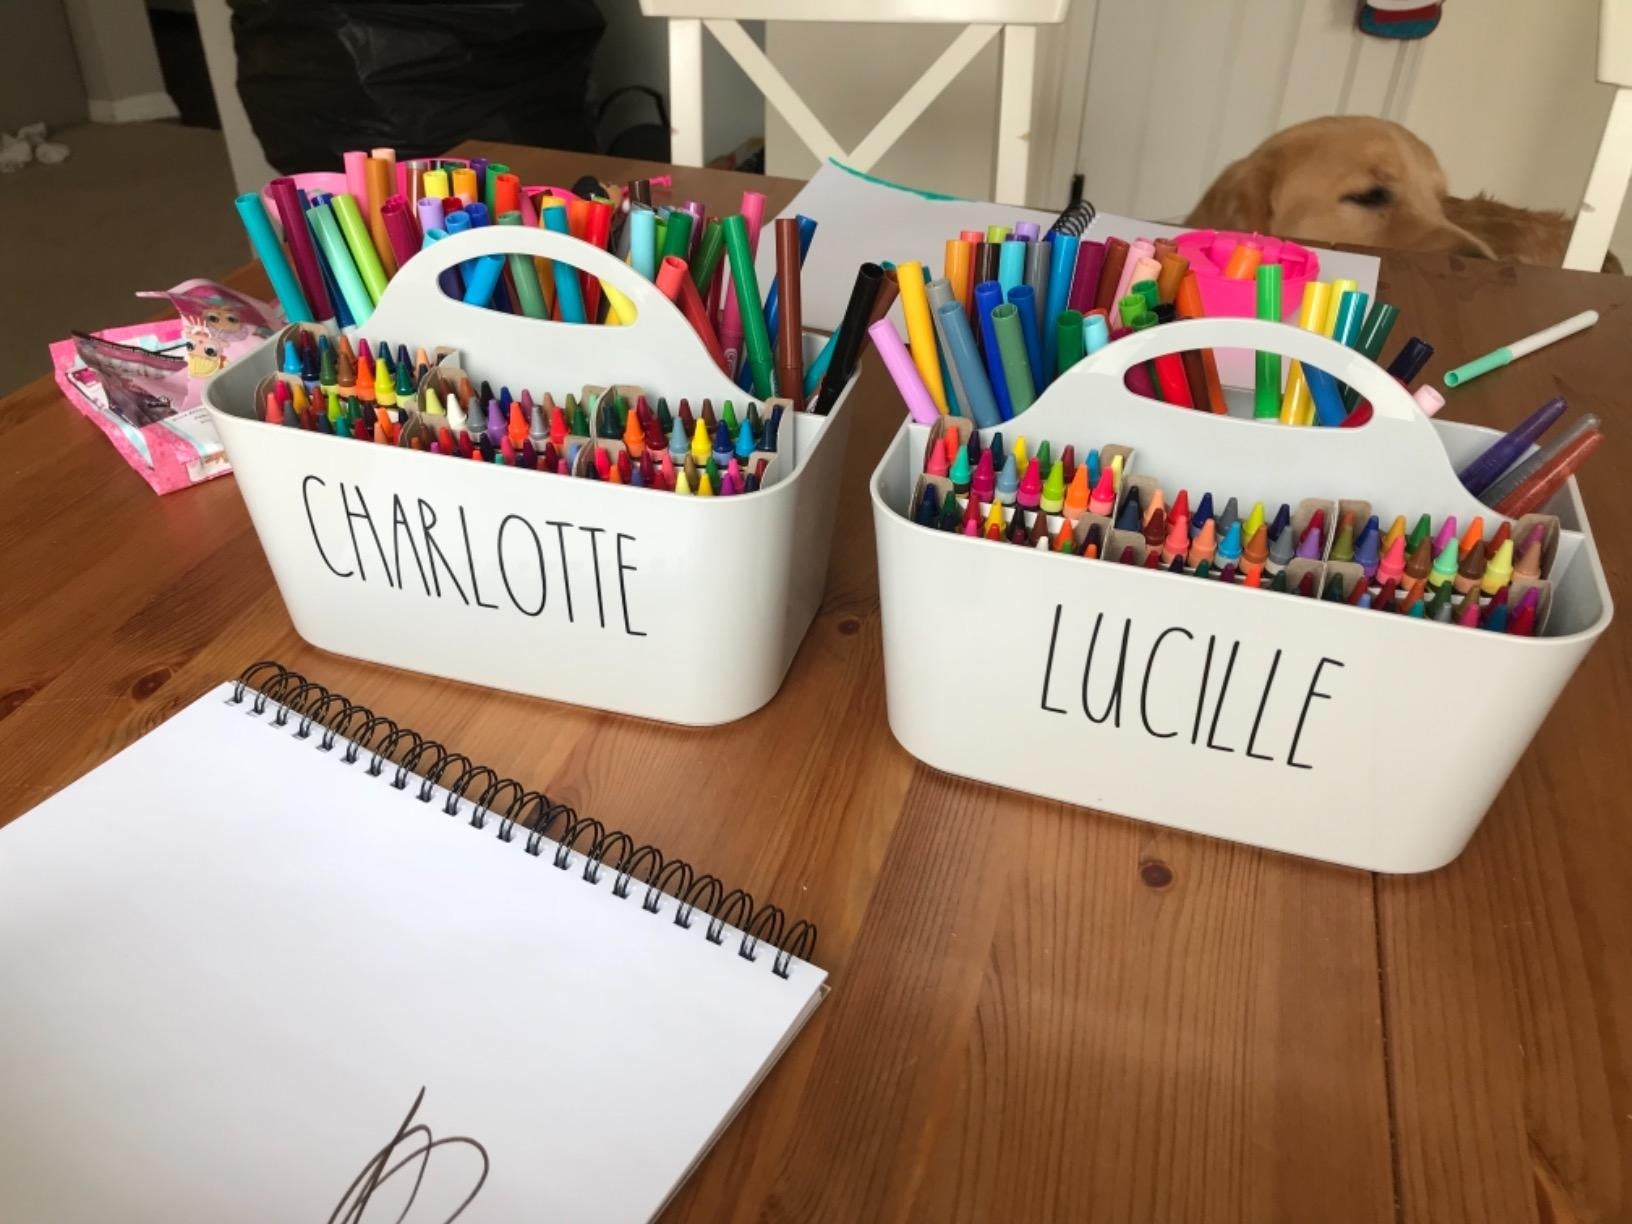 37 Back To School Items That Make Everyday Life Easier - 22 Words